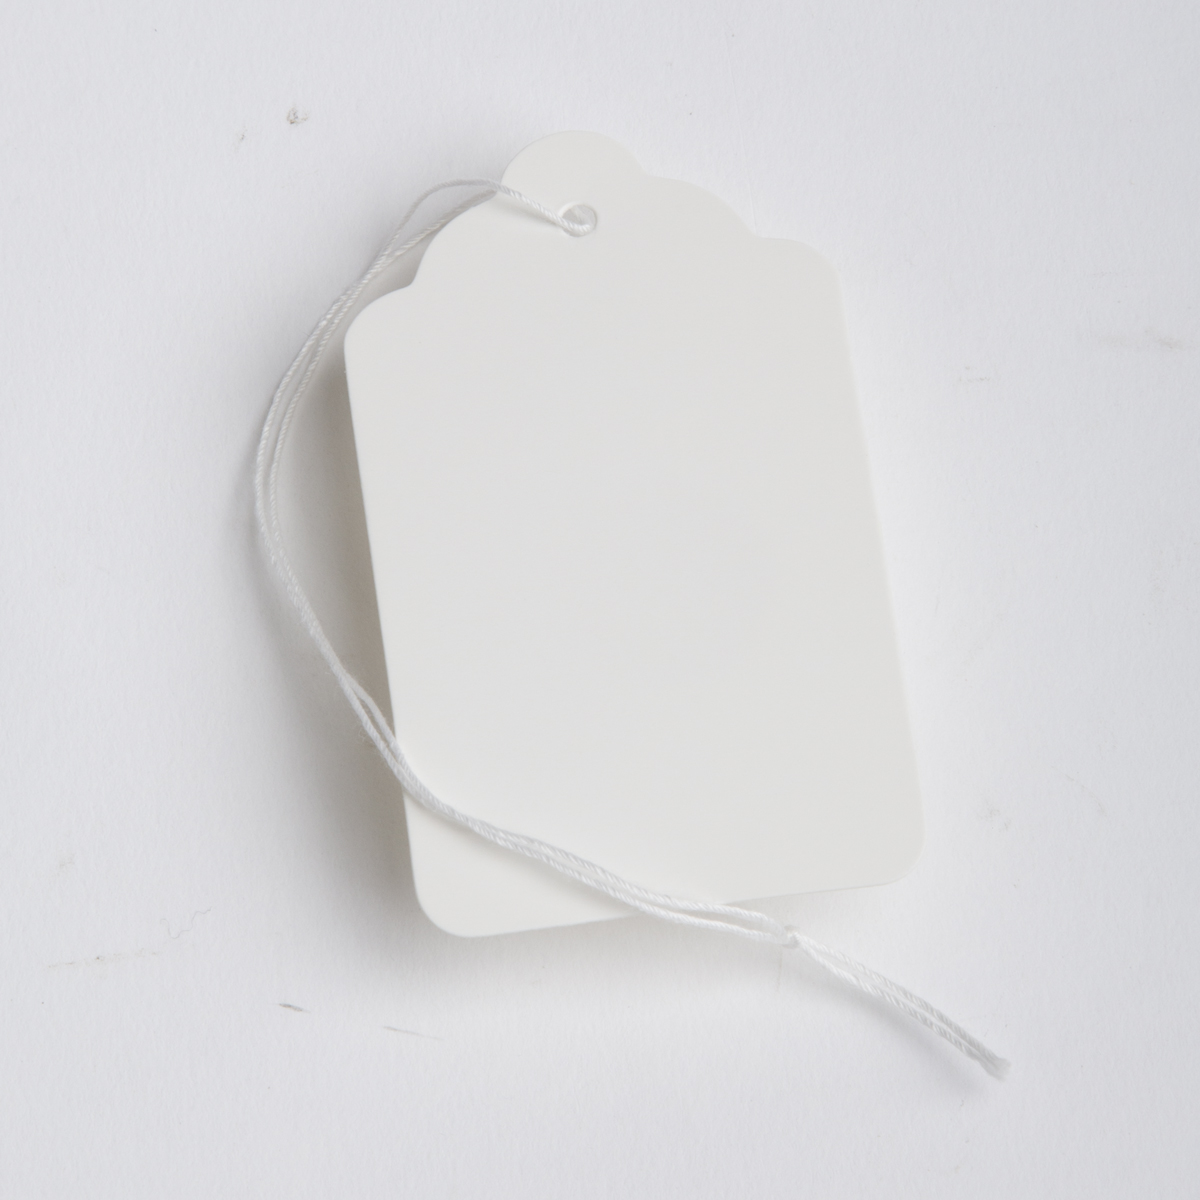 100 Blank White Merchandise Price Tags with Strings Size #7 1 7/16 x 2 3/16 